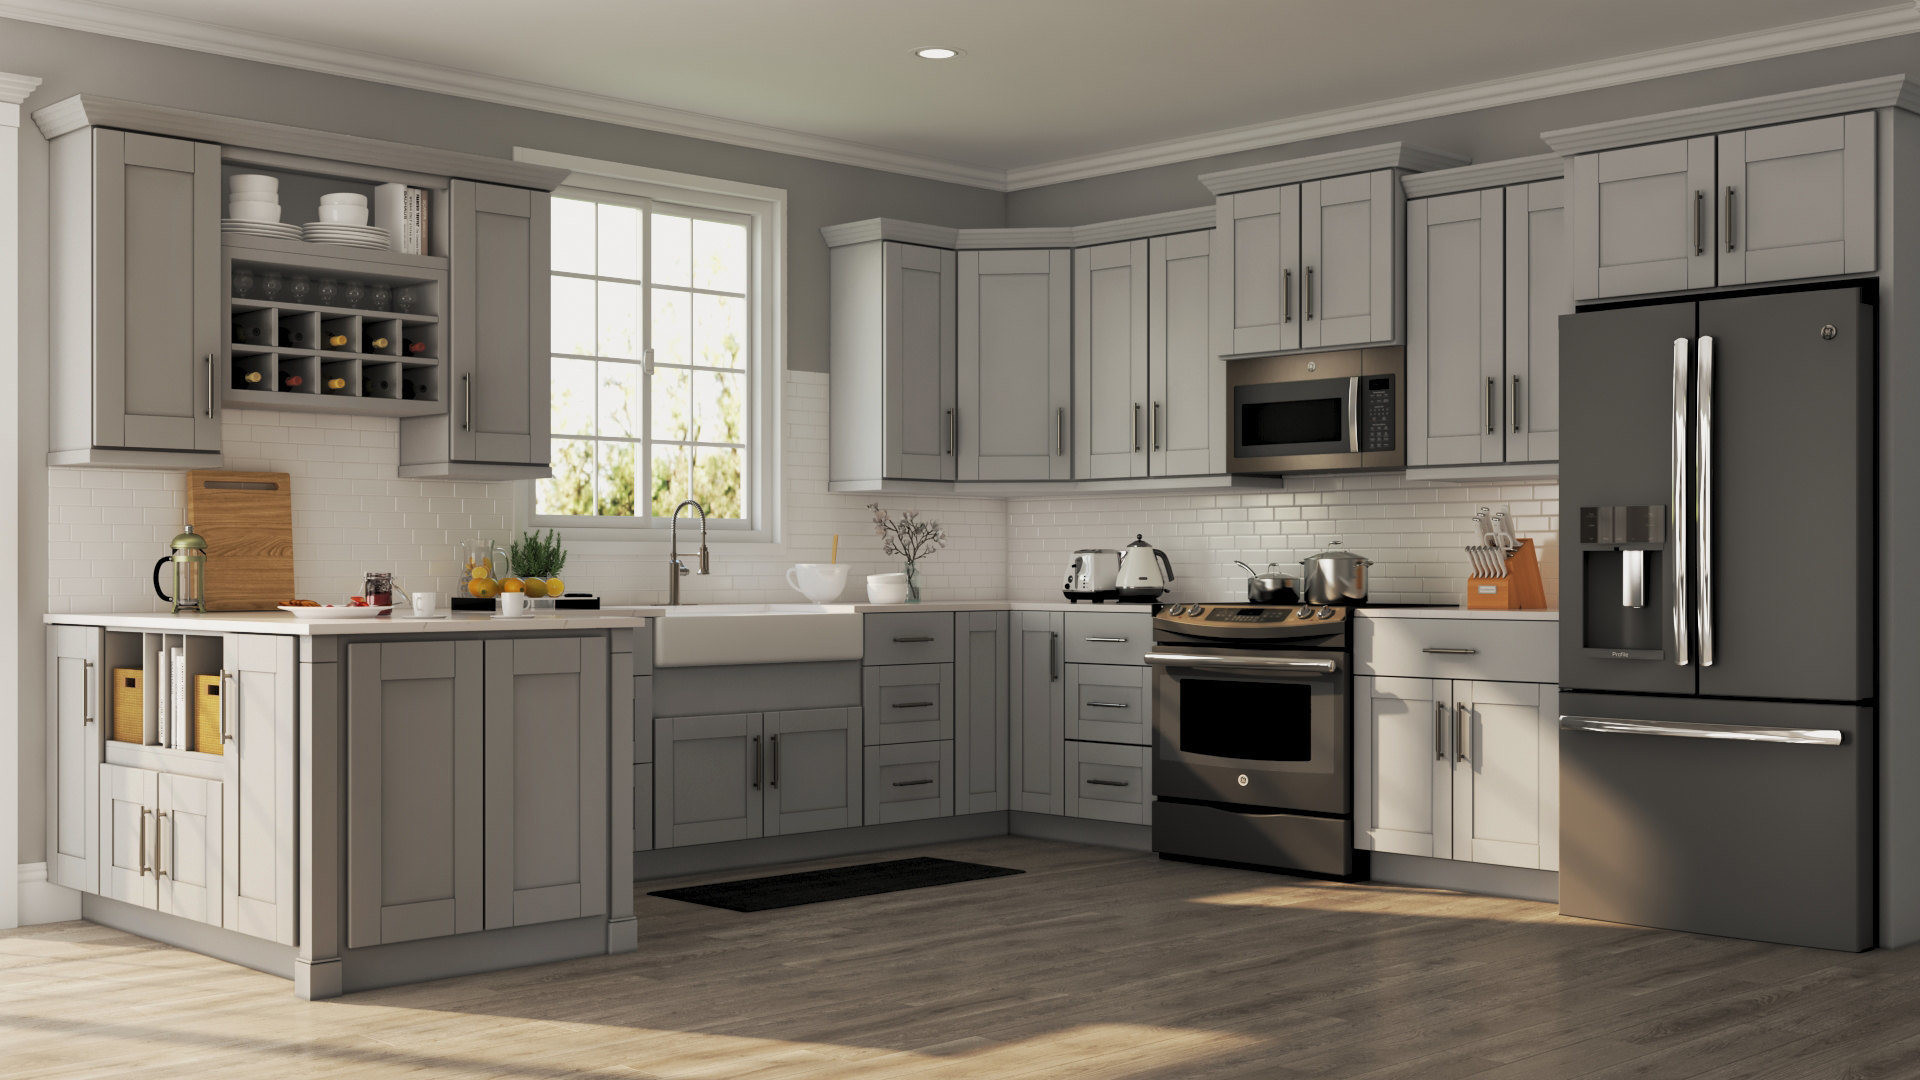 Grey Kitchen Cabinets
 Shaker Wall Cabinets in Dove Gray – Kitchen – The Home Depot